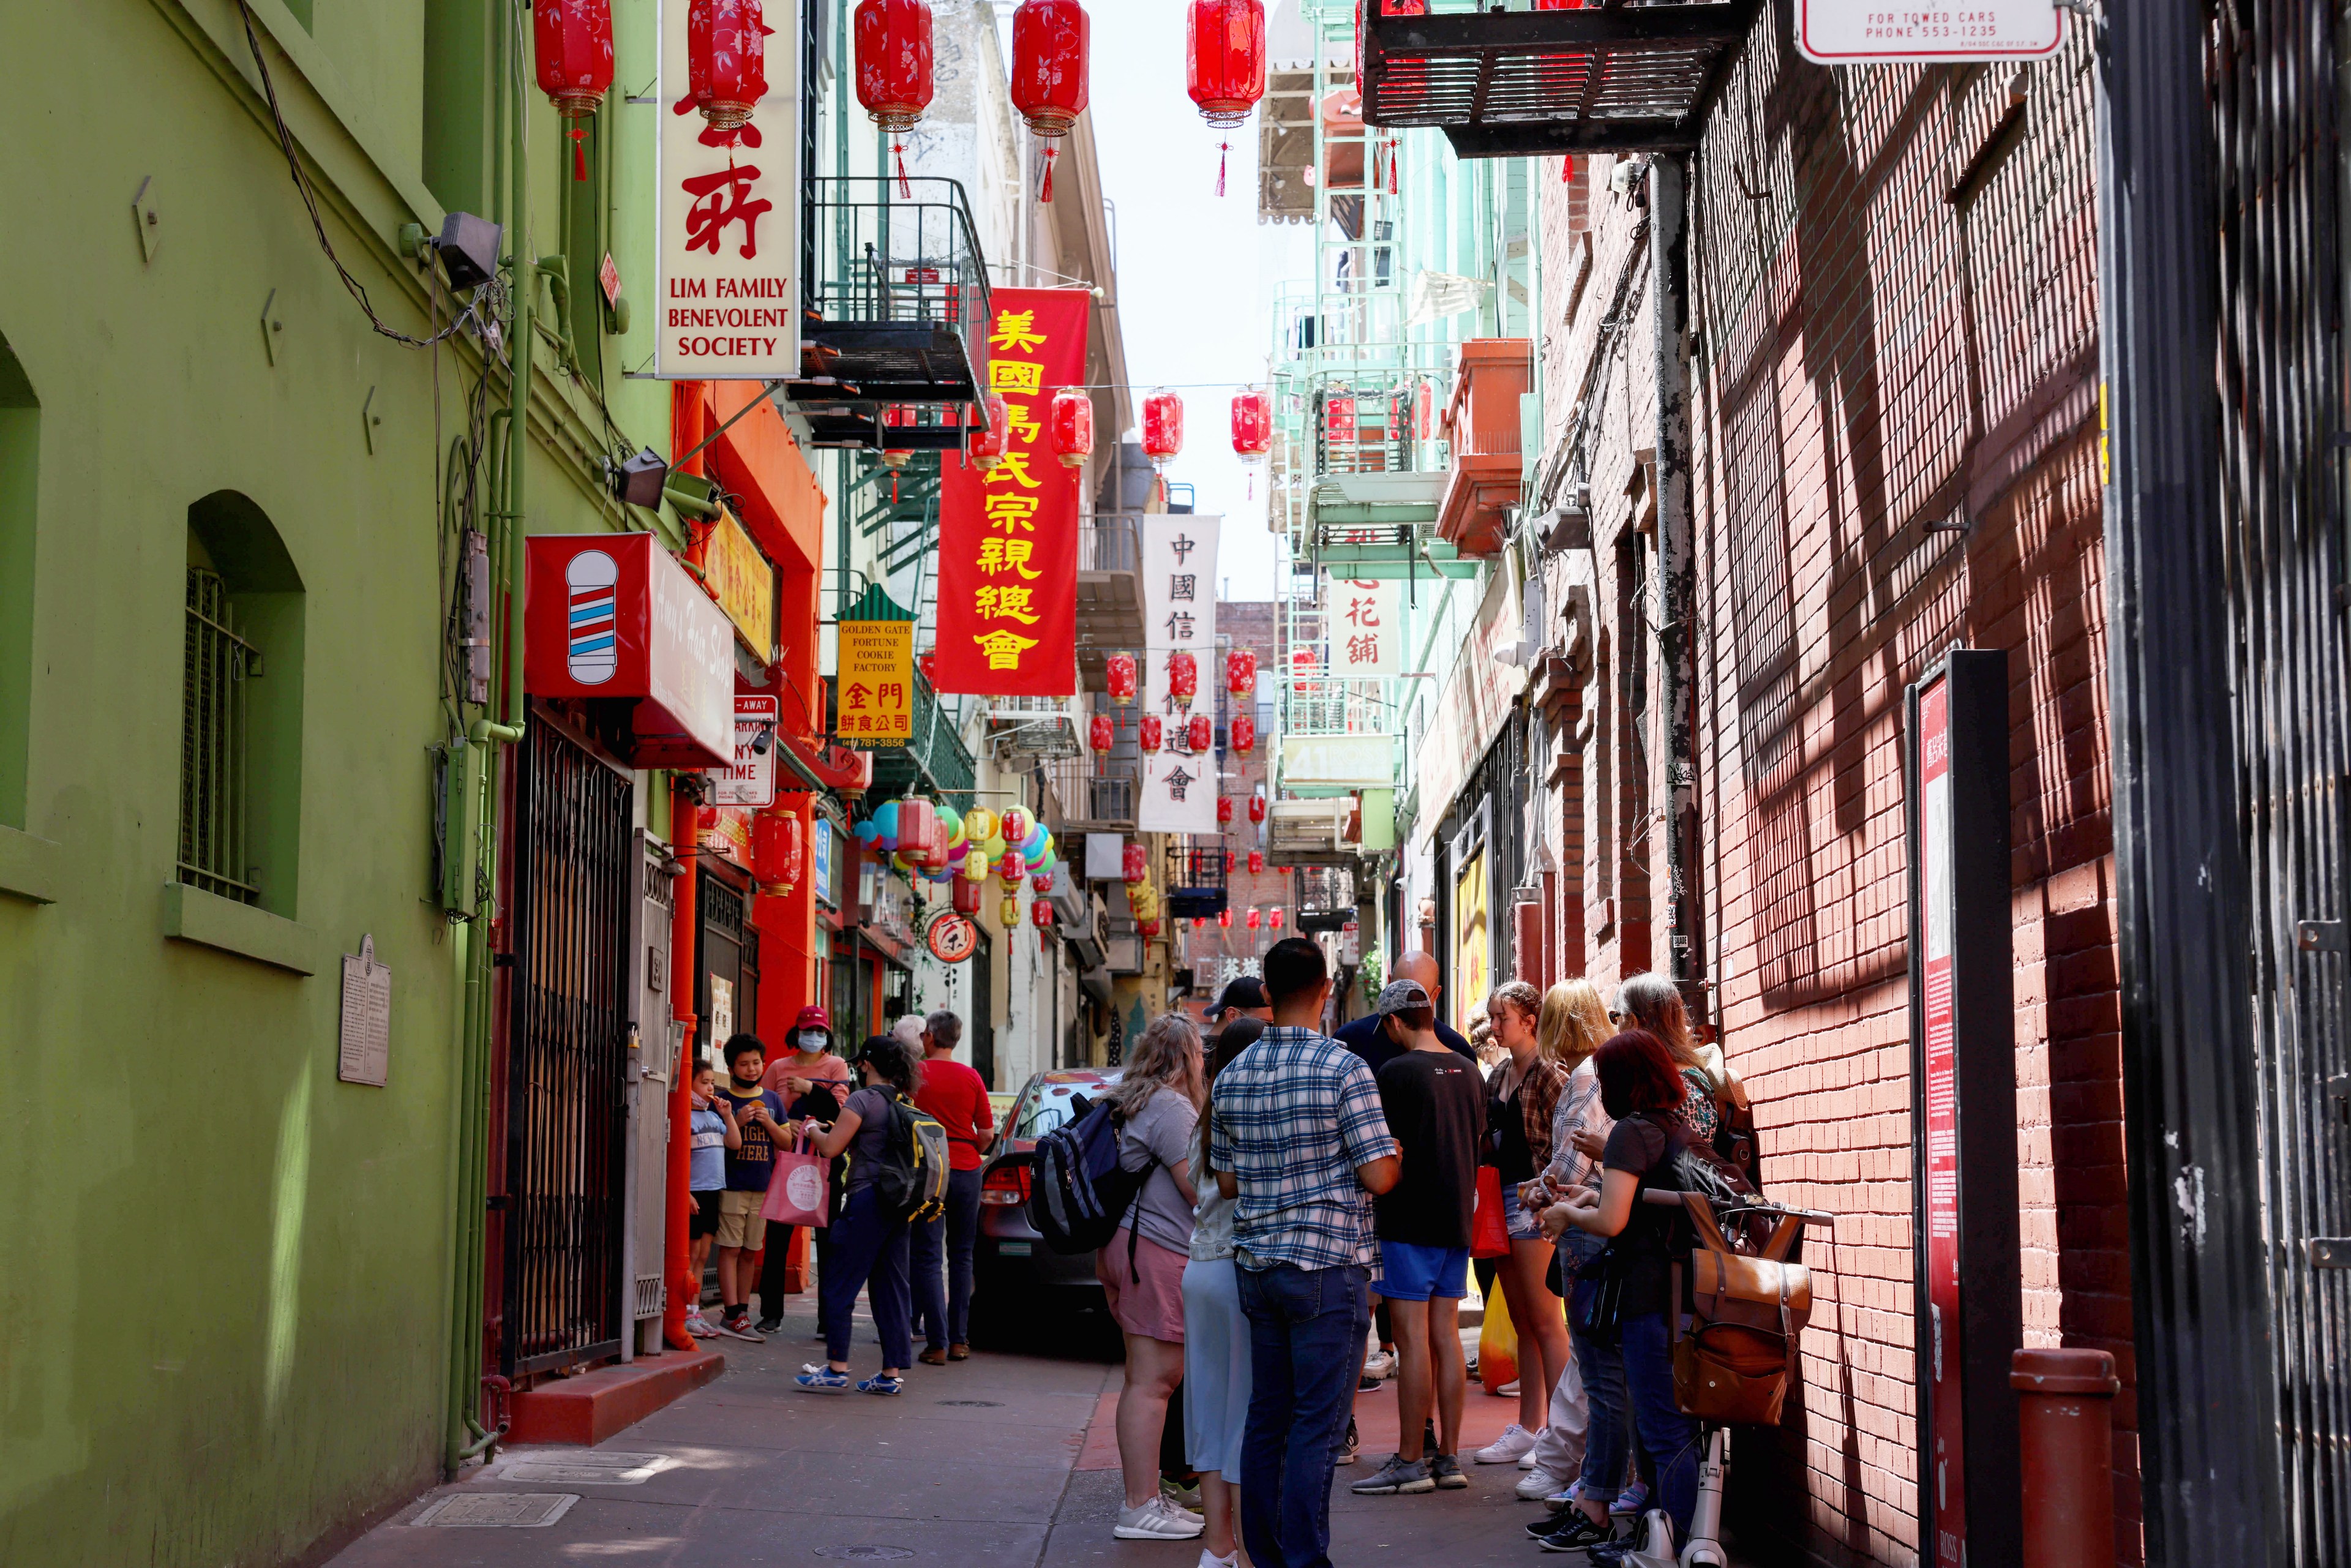 People walk on Ross Alley in Chinatown, San Francisco on Wednesday, June 22nd, 2022. The alley is full of restaurants and shops and is a popular location for tourists.